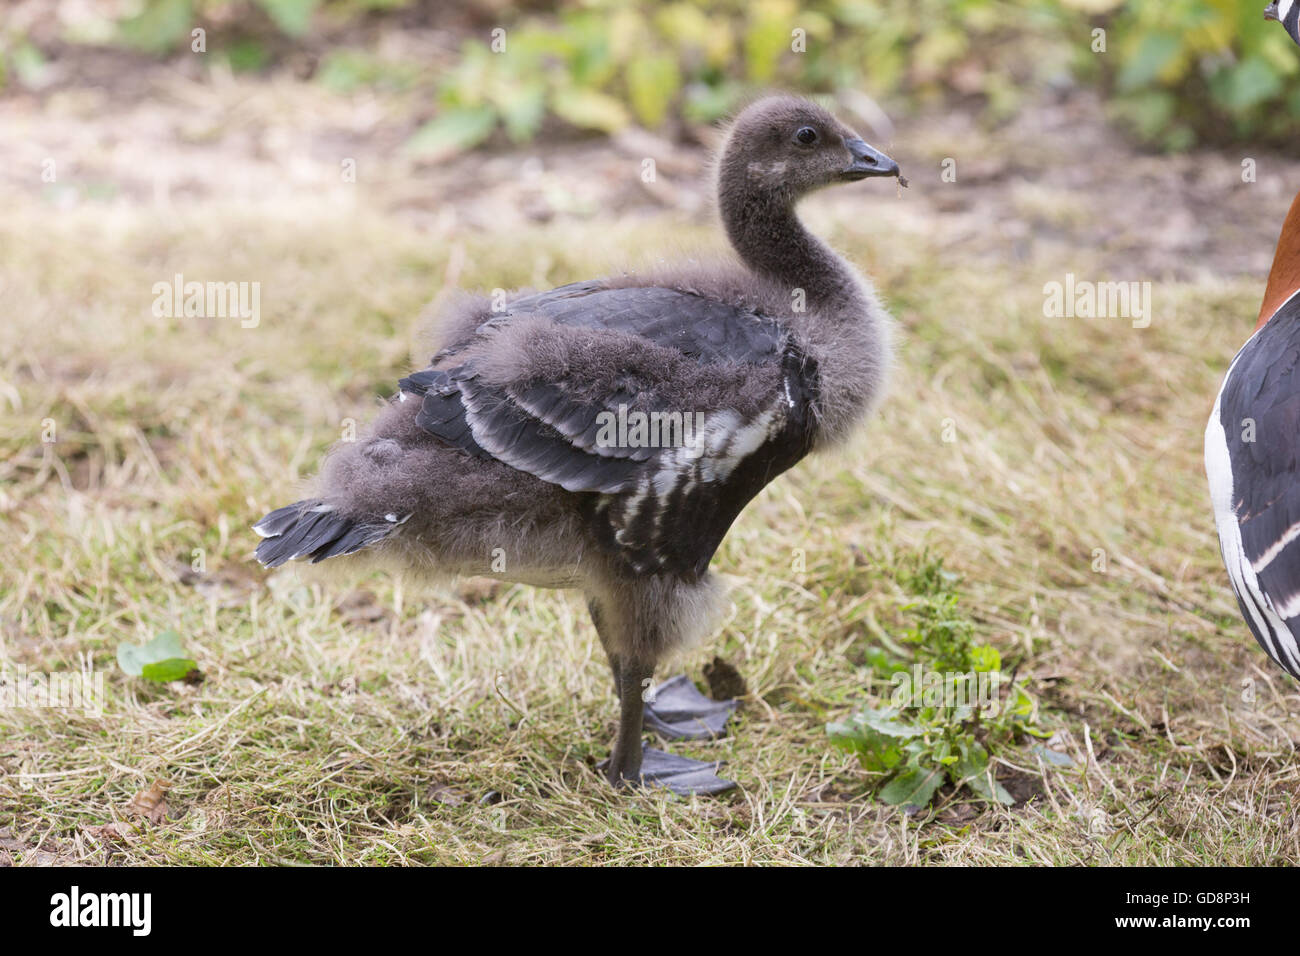 Red-breasted Goose (Branta ruficollis). Twenty Eight days old. One of six being parent reared in avicultural collection. Stock Photo